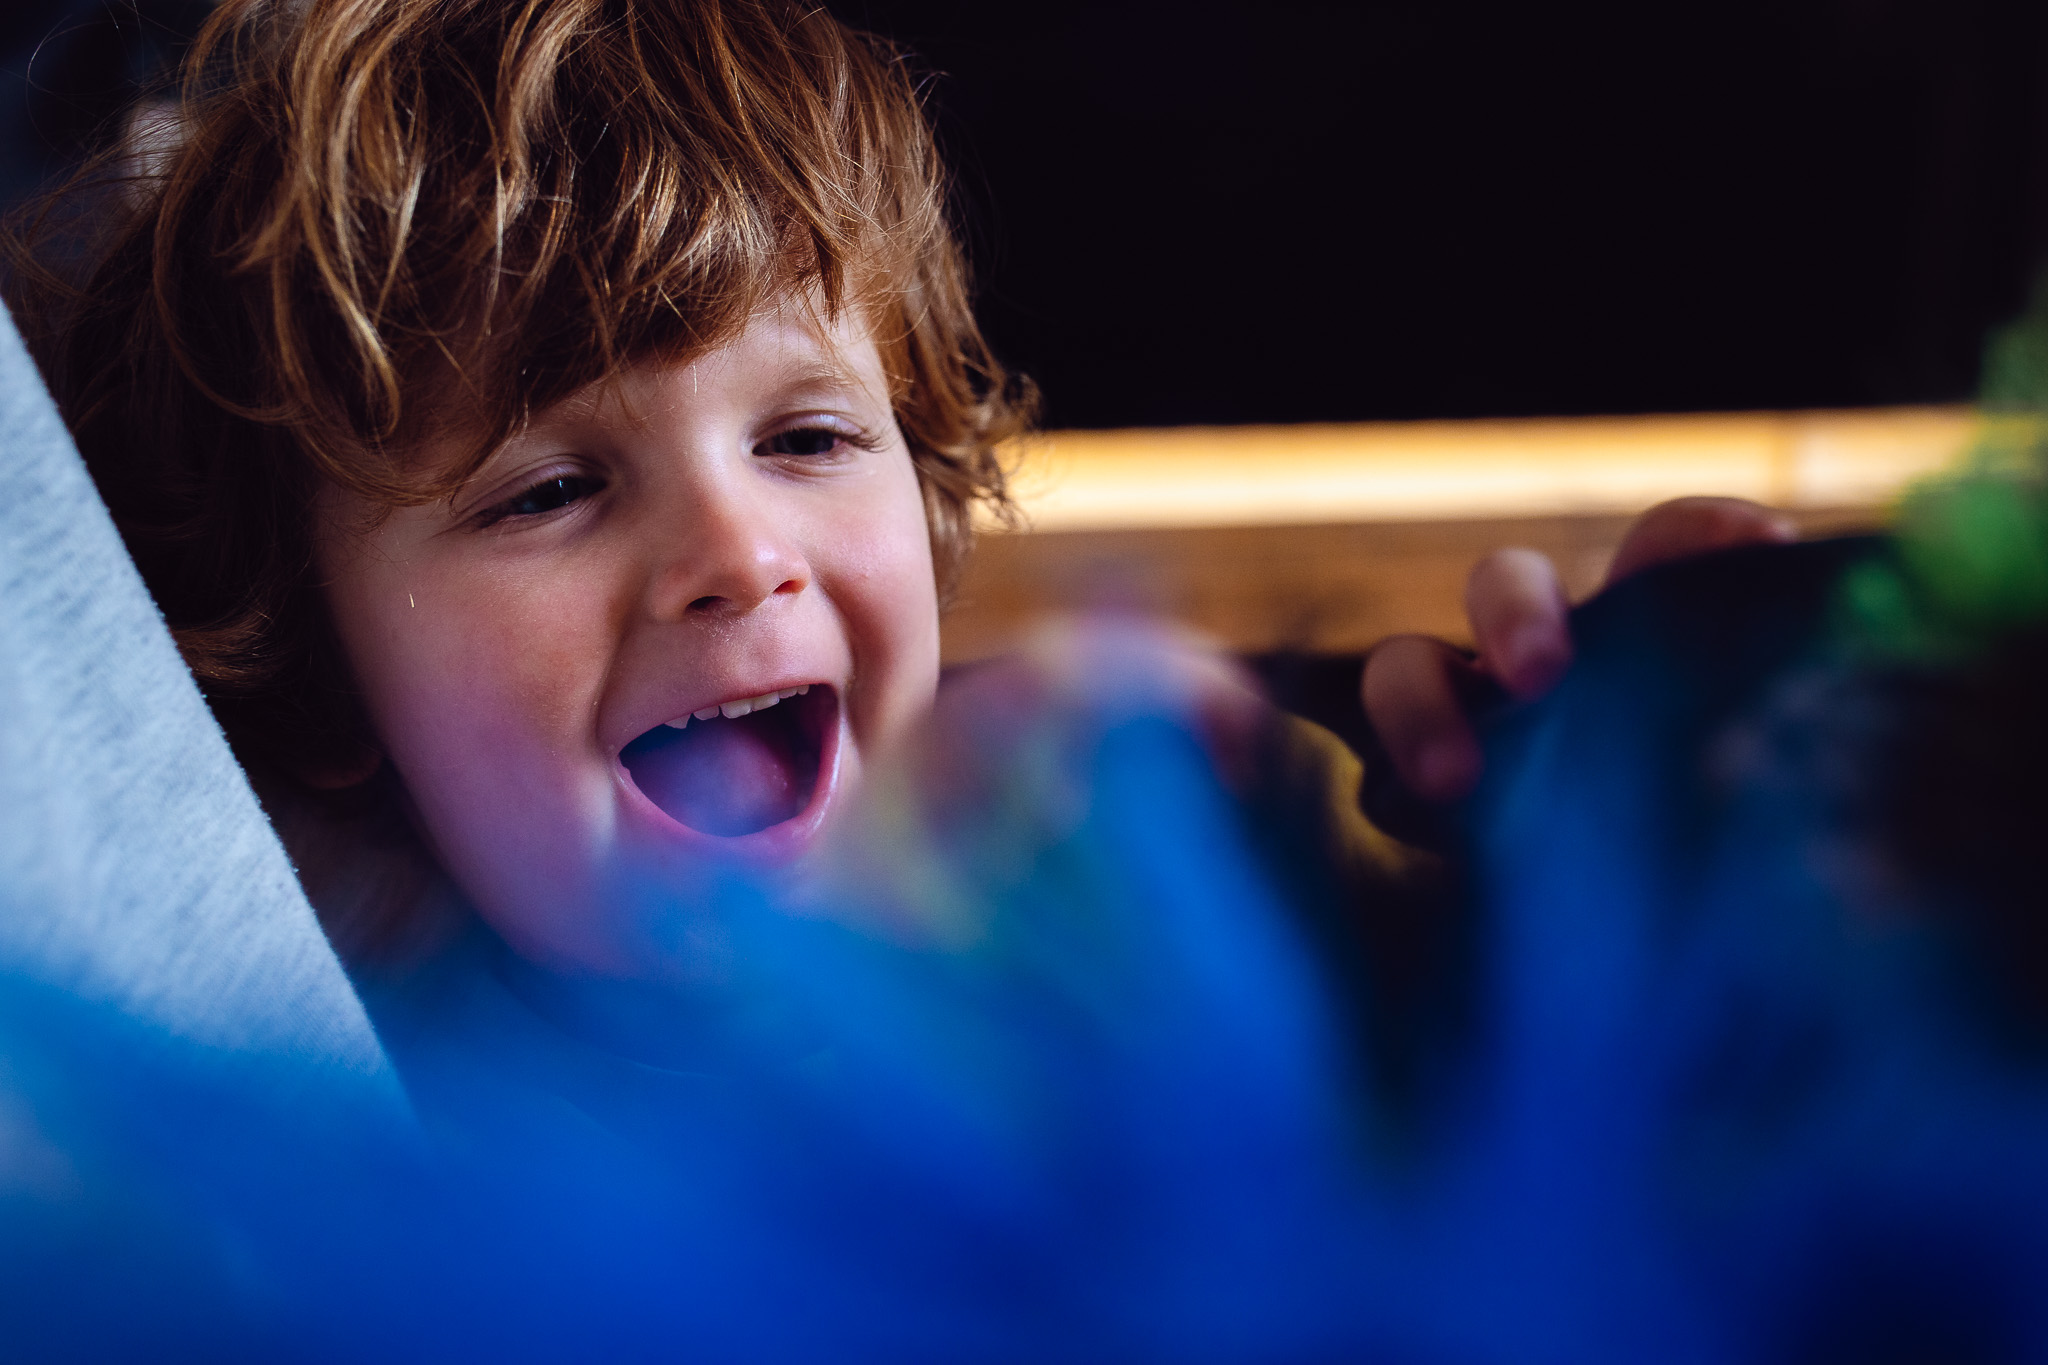 Leo laughing at a blue puppet during a family photo session.